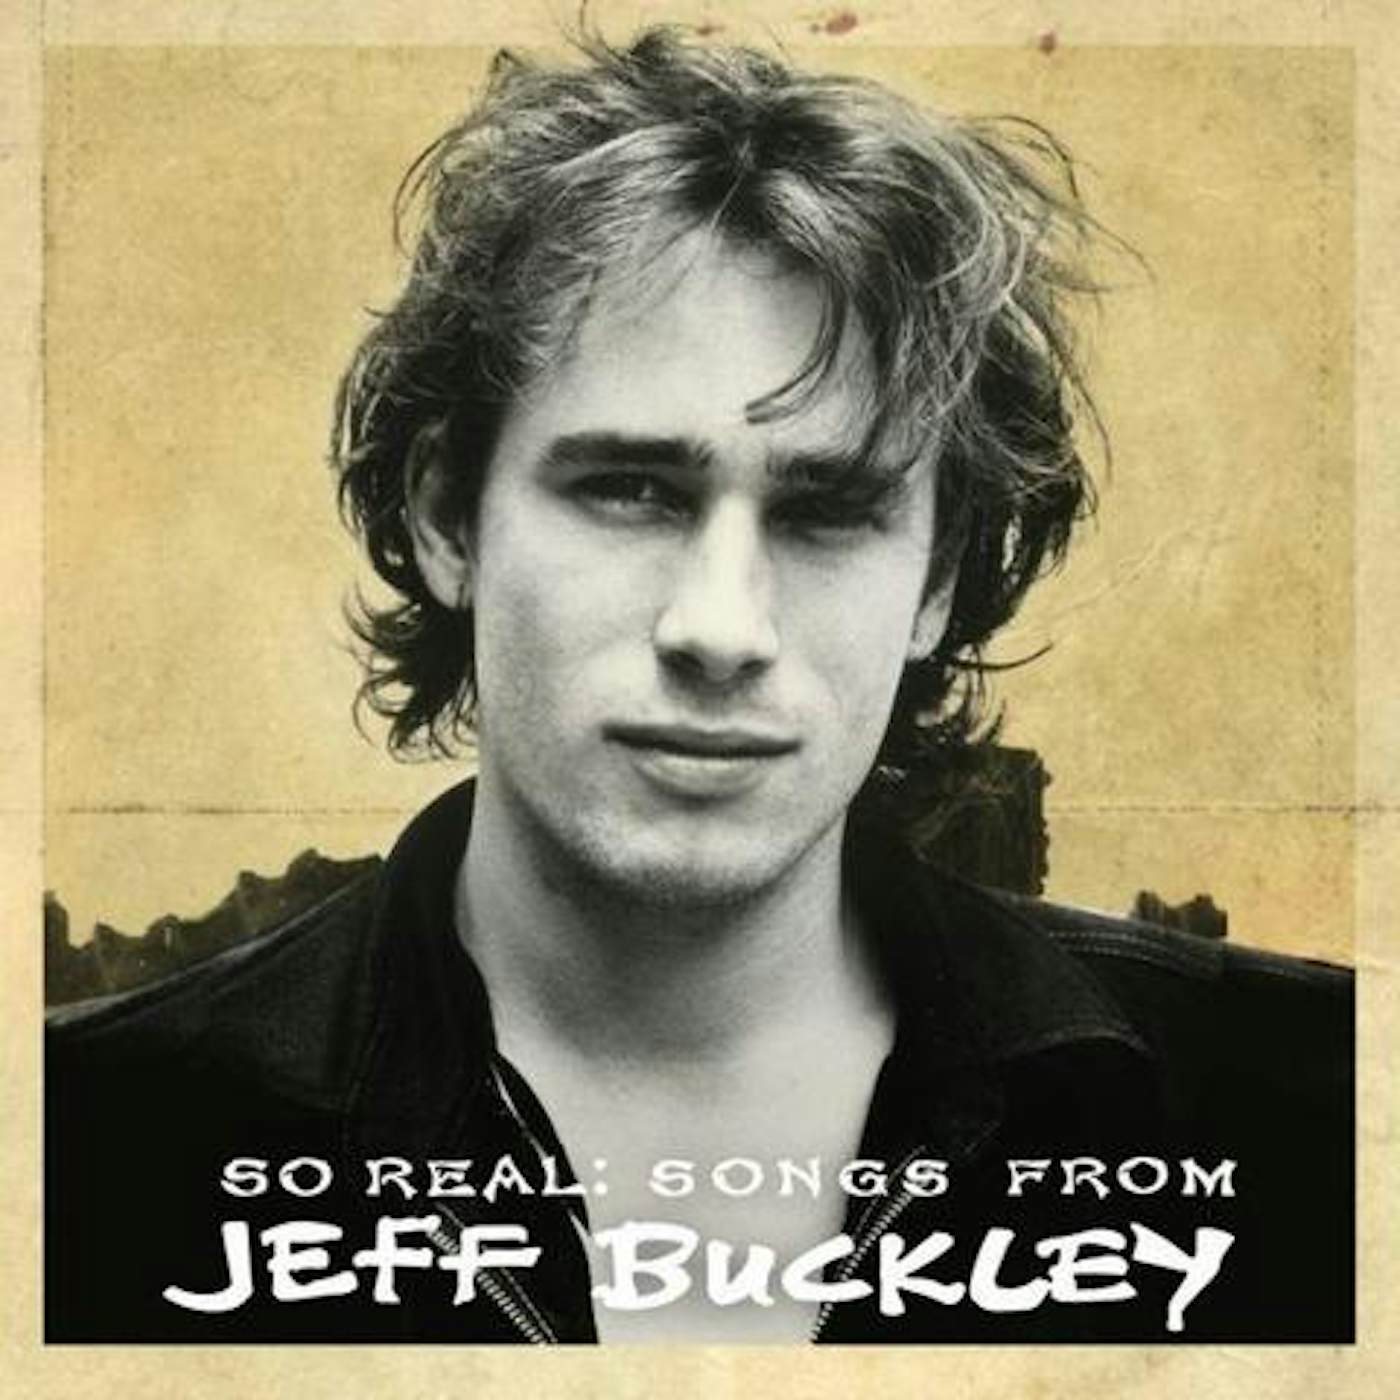 SO REAL: SONGS FROM JEFF BUCKLEY (GOLD SERIES) CD